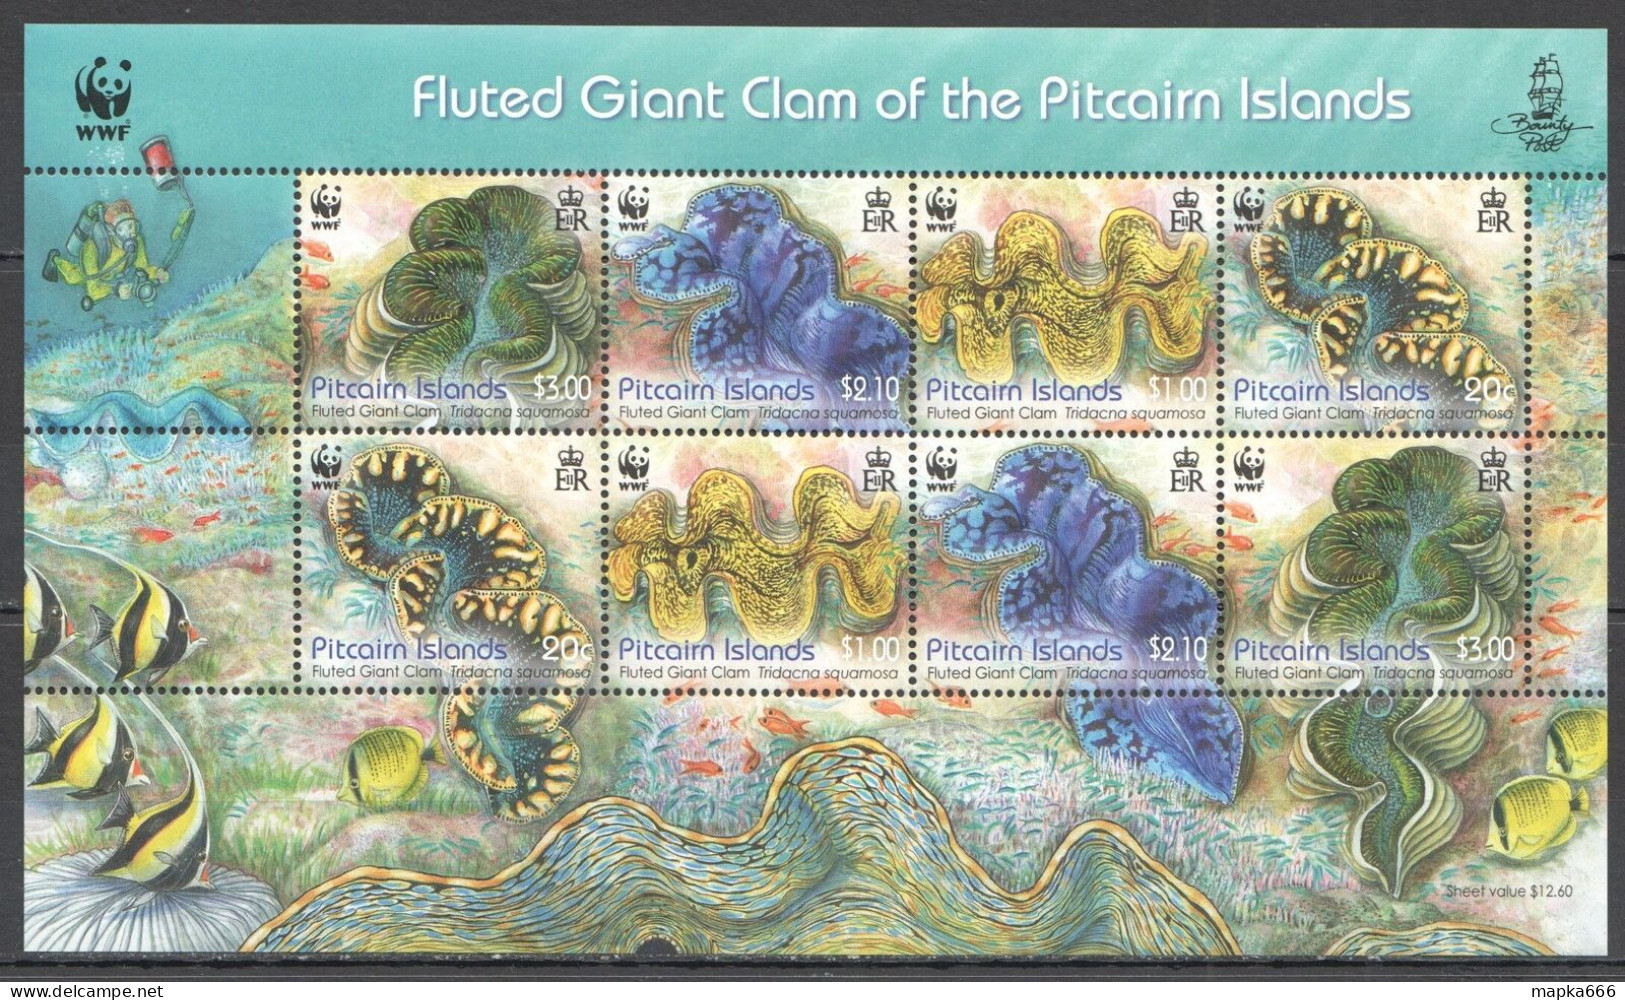 Ft103 2012 Pitcairn Islands Wwf Fluted Giant Clam Michel 25 Euro #865-8 1Kb Mnh - Vie Marine